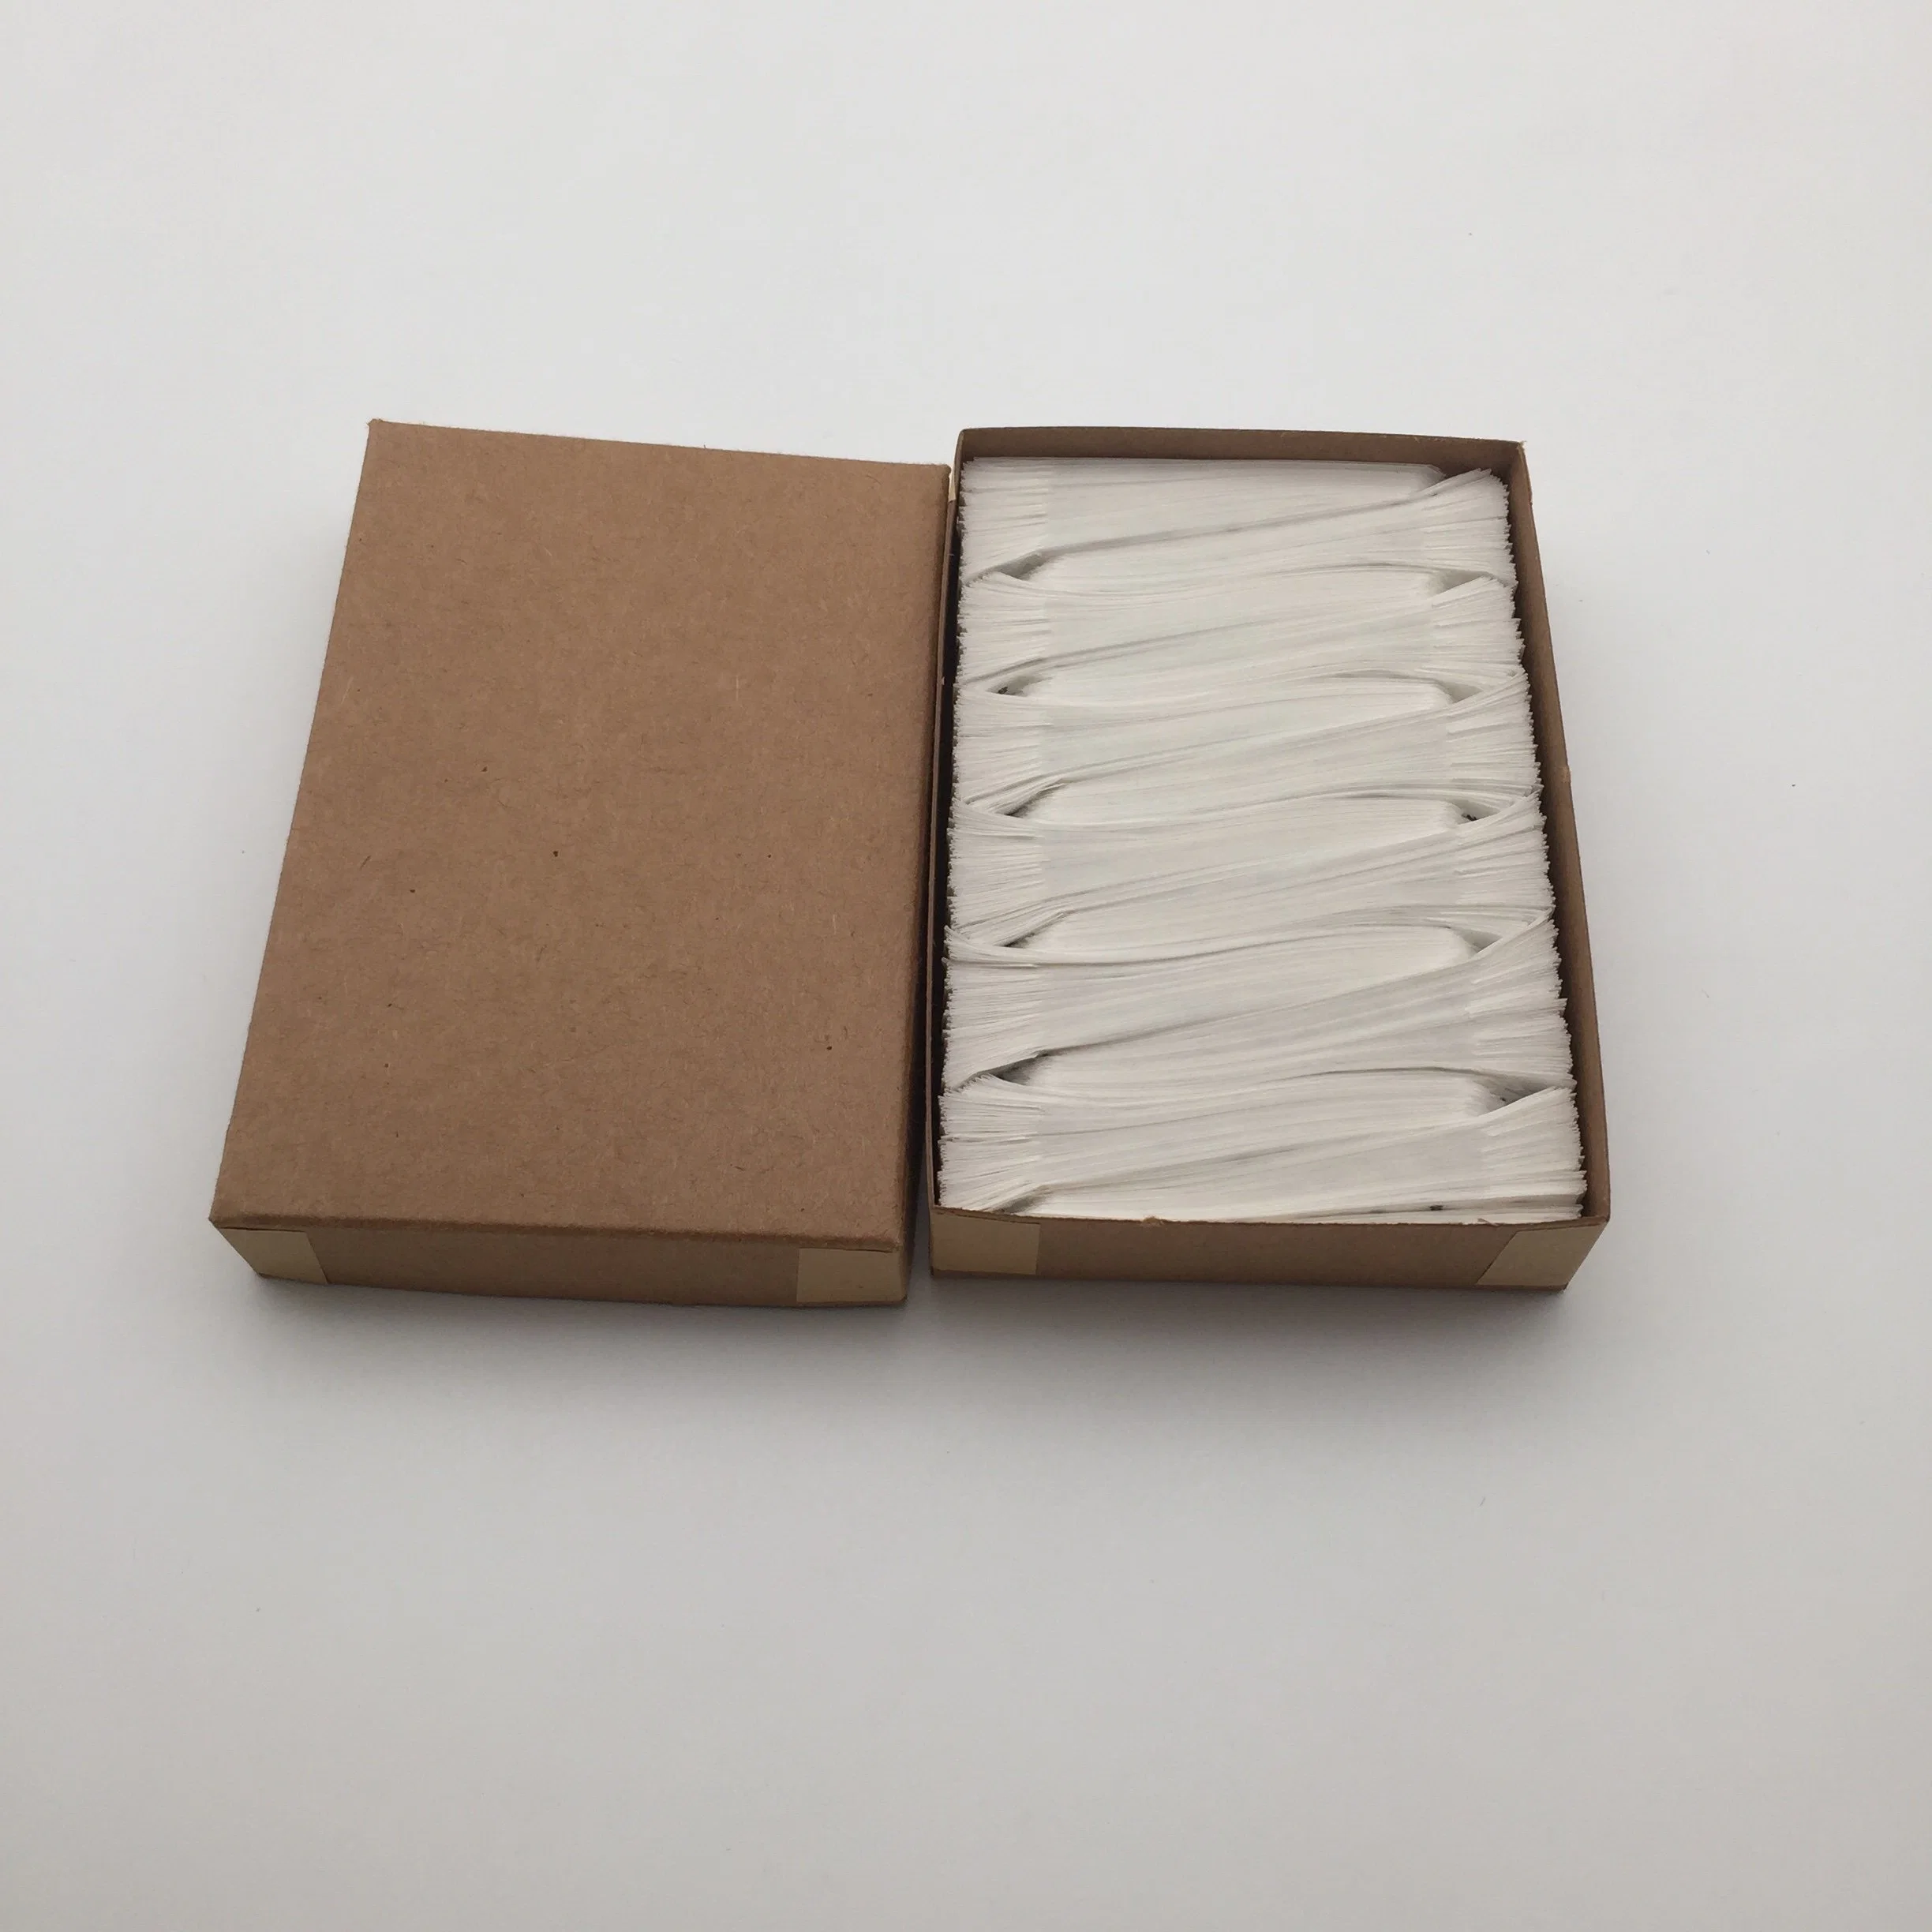 Hot Sale 24mm White Small Vellum Glassiness Stamp Bags Wax Paper Baggies